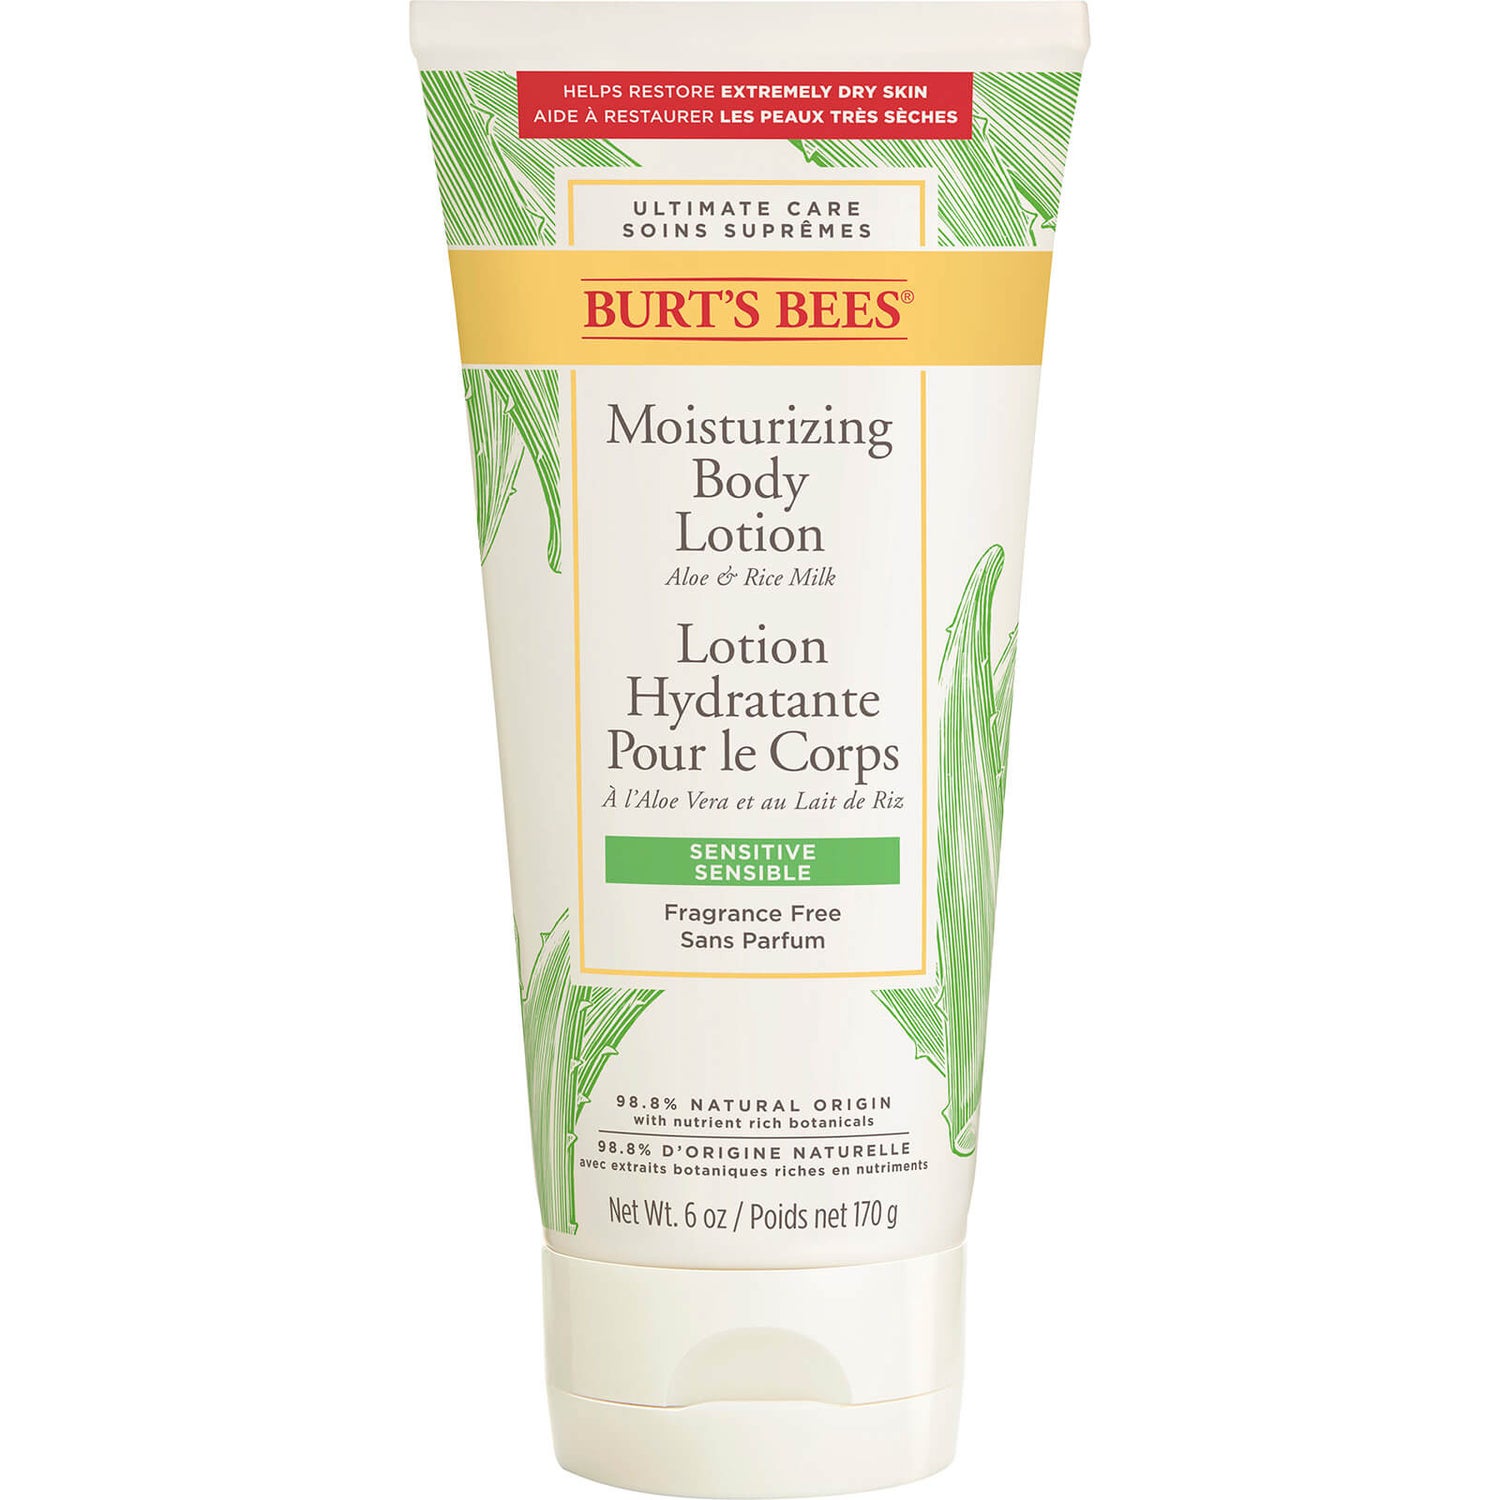 Moisturising Body Lotion for Very Dry and Sensitive Skin